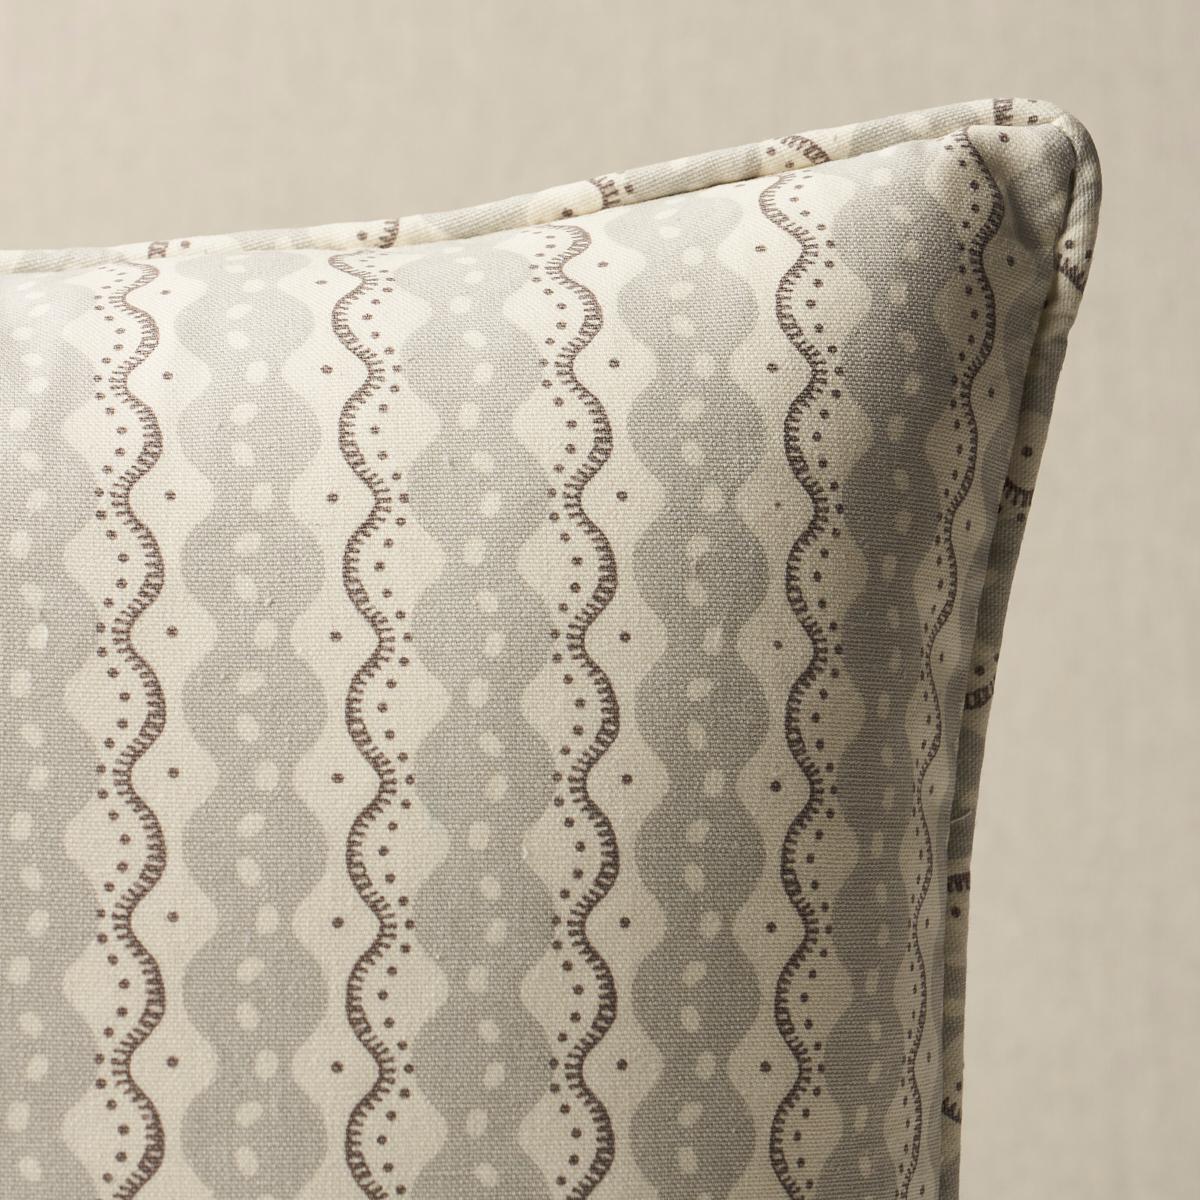 This pillow features Centipede Stripe by Neisha Crosland with a self welt finish. Created by Neisha Crosland, Centipede Stripe fabric is an imaginative scalloped stripe enlivened by fanciful dot details. Pillow includes a feather/down fill insert